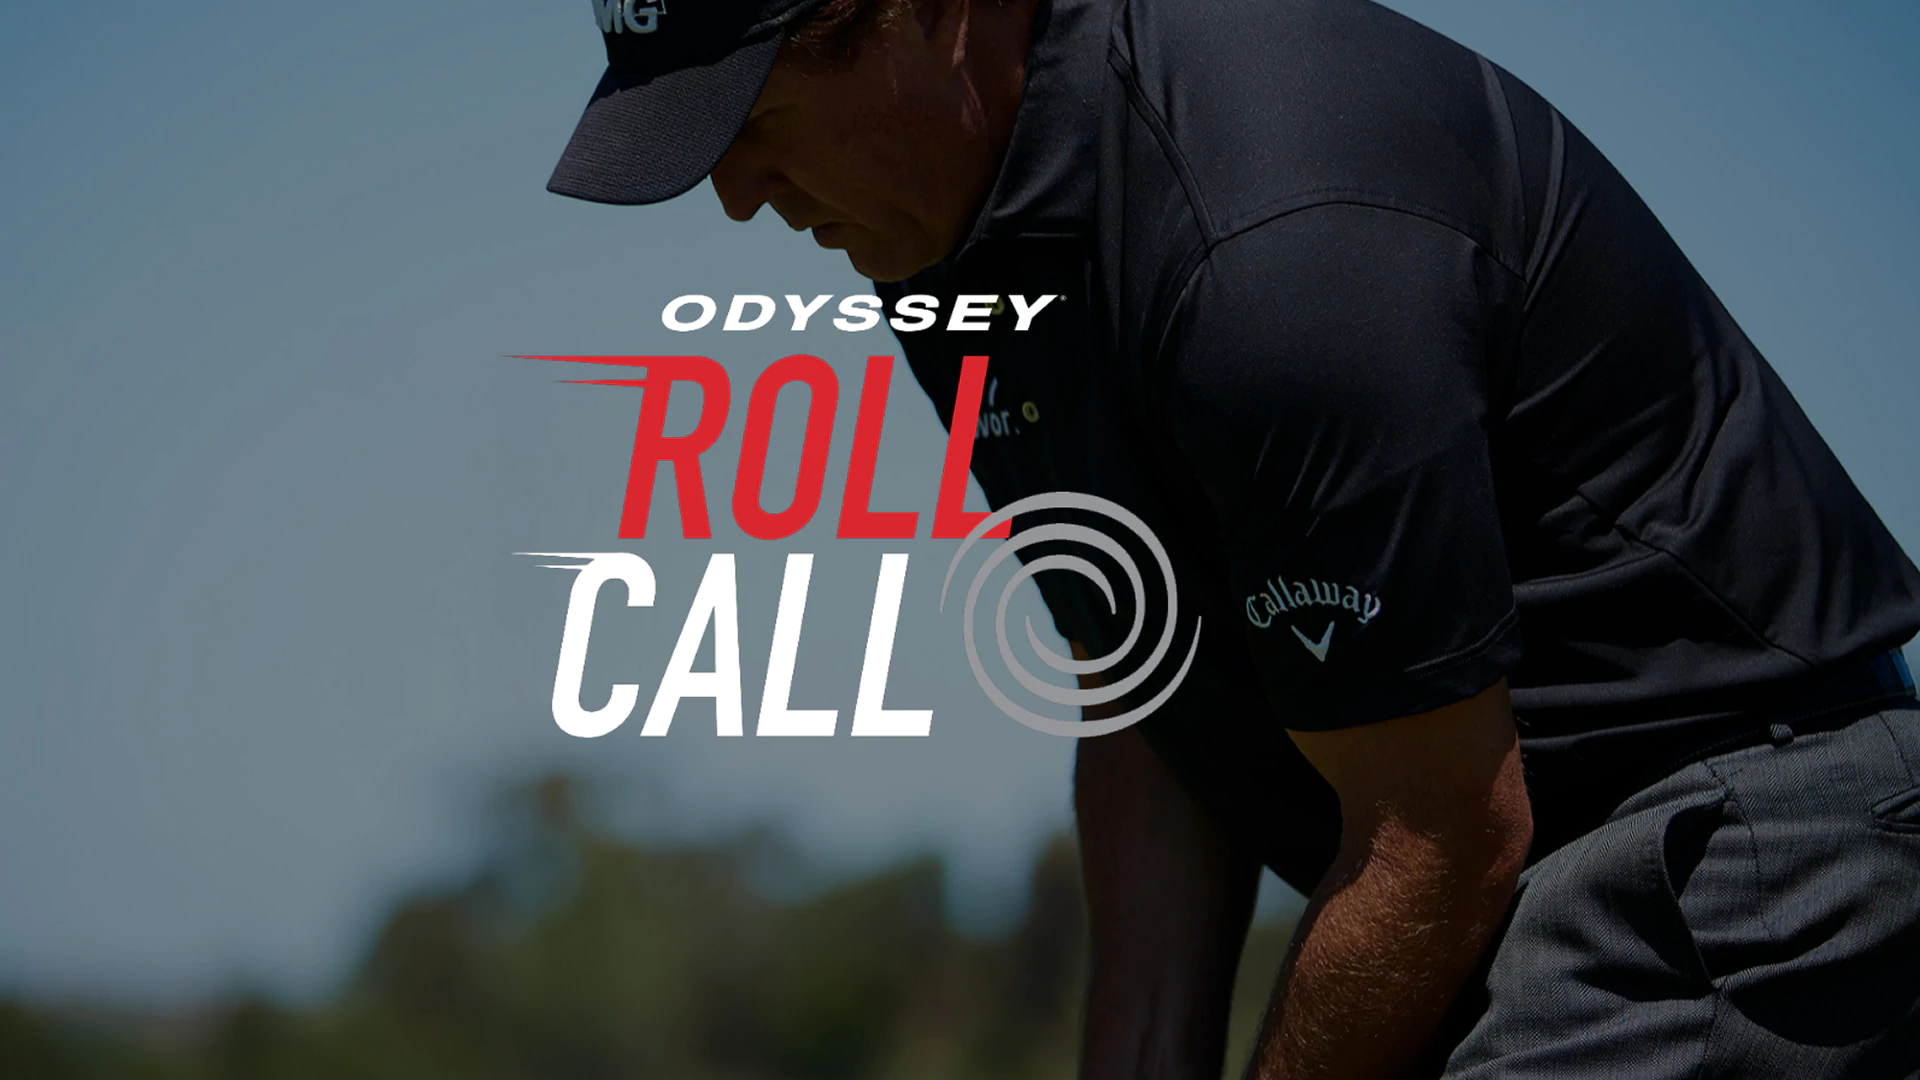 Sponsored: Pro putting tips with Odyssey Roll Call